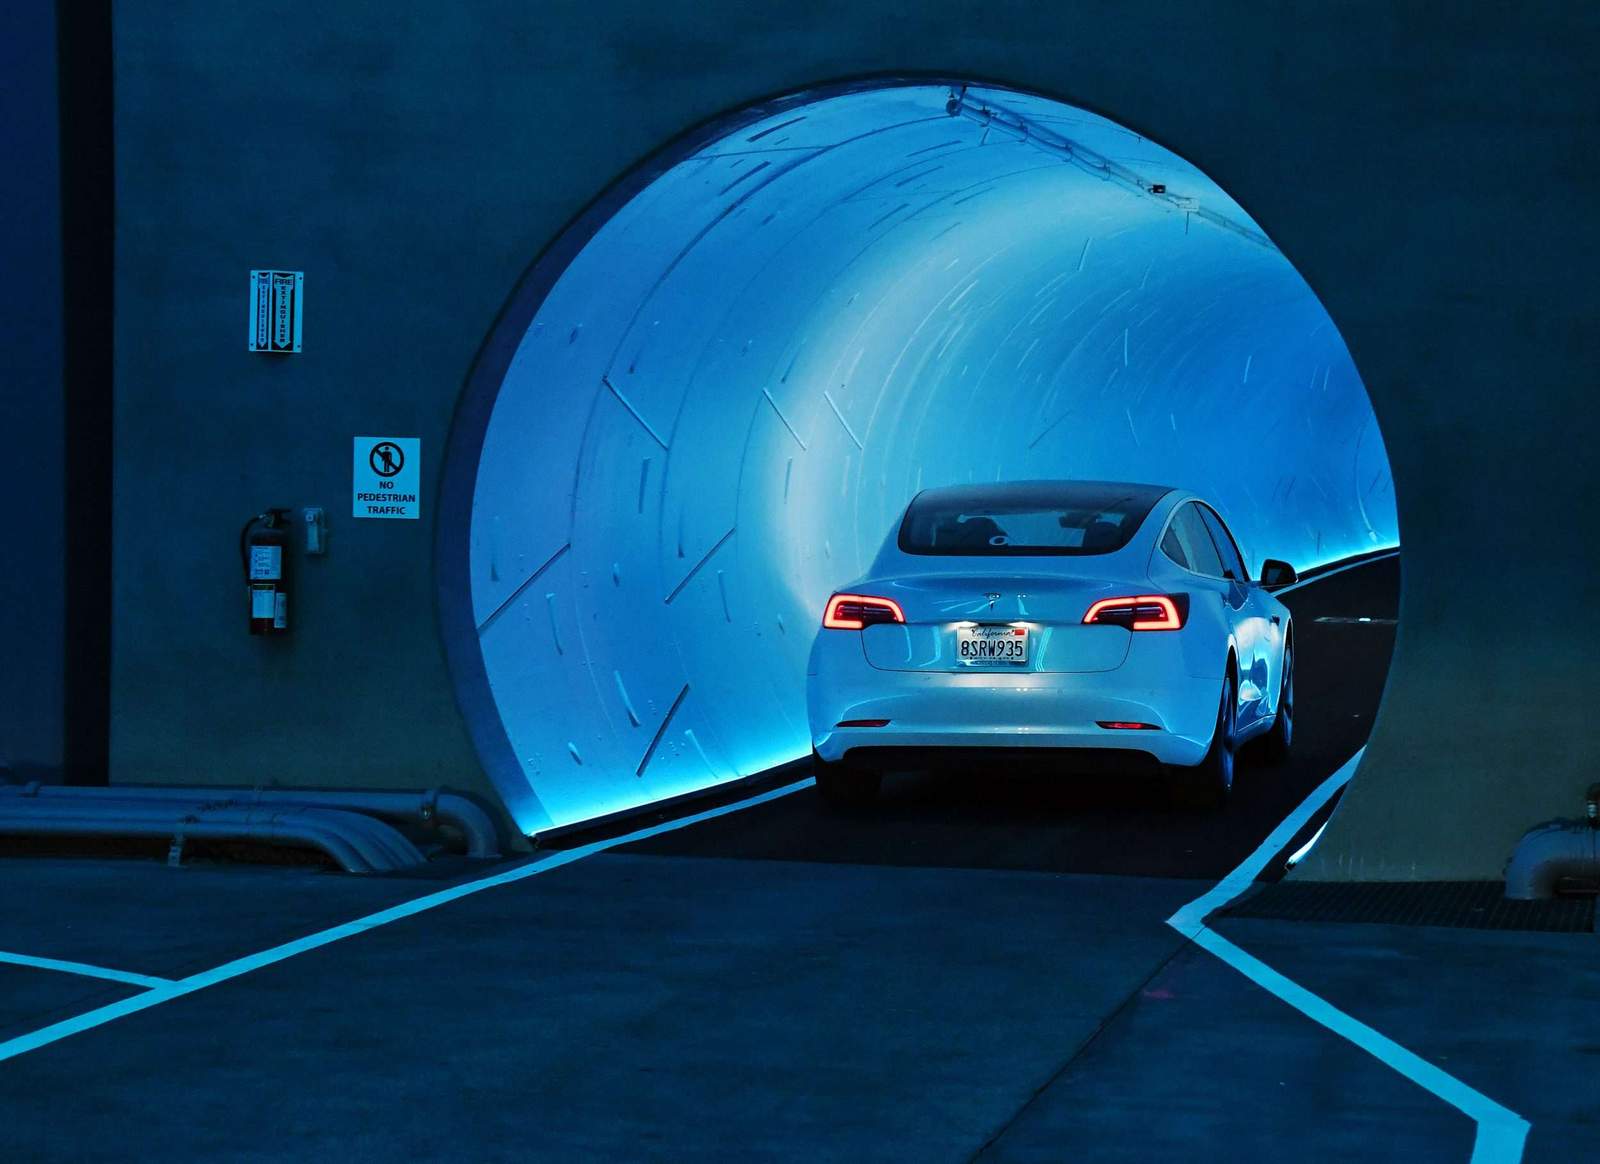 Elon Musk presents a proposal to build 6-mile tunnels in Miami